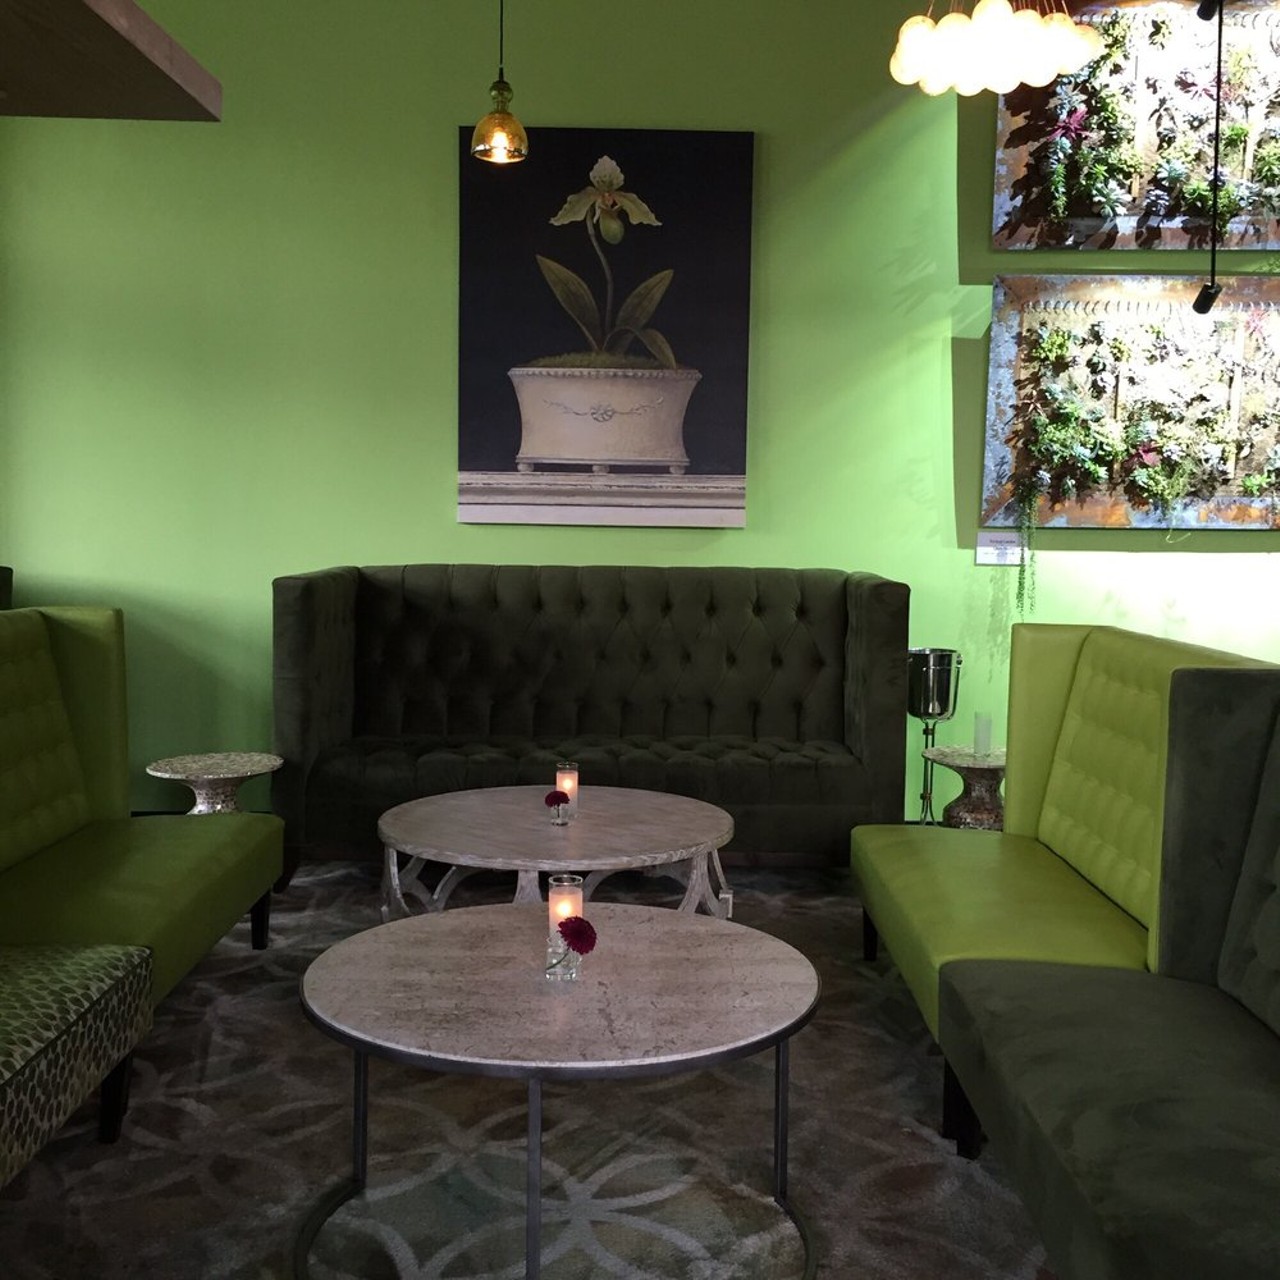 Chartreuse - 15 E. Kirby St. Ste D, New American cuisine with botanical d&eacute;cor (photo by MyThy H./Yelp).